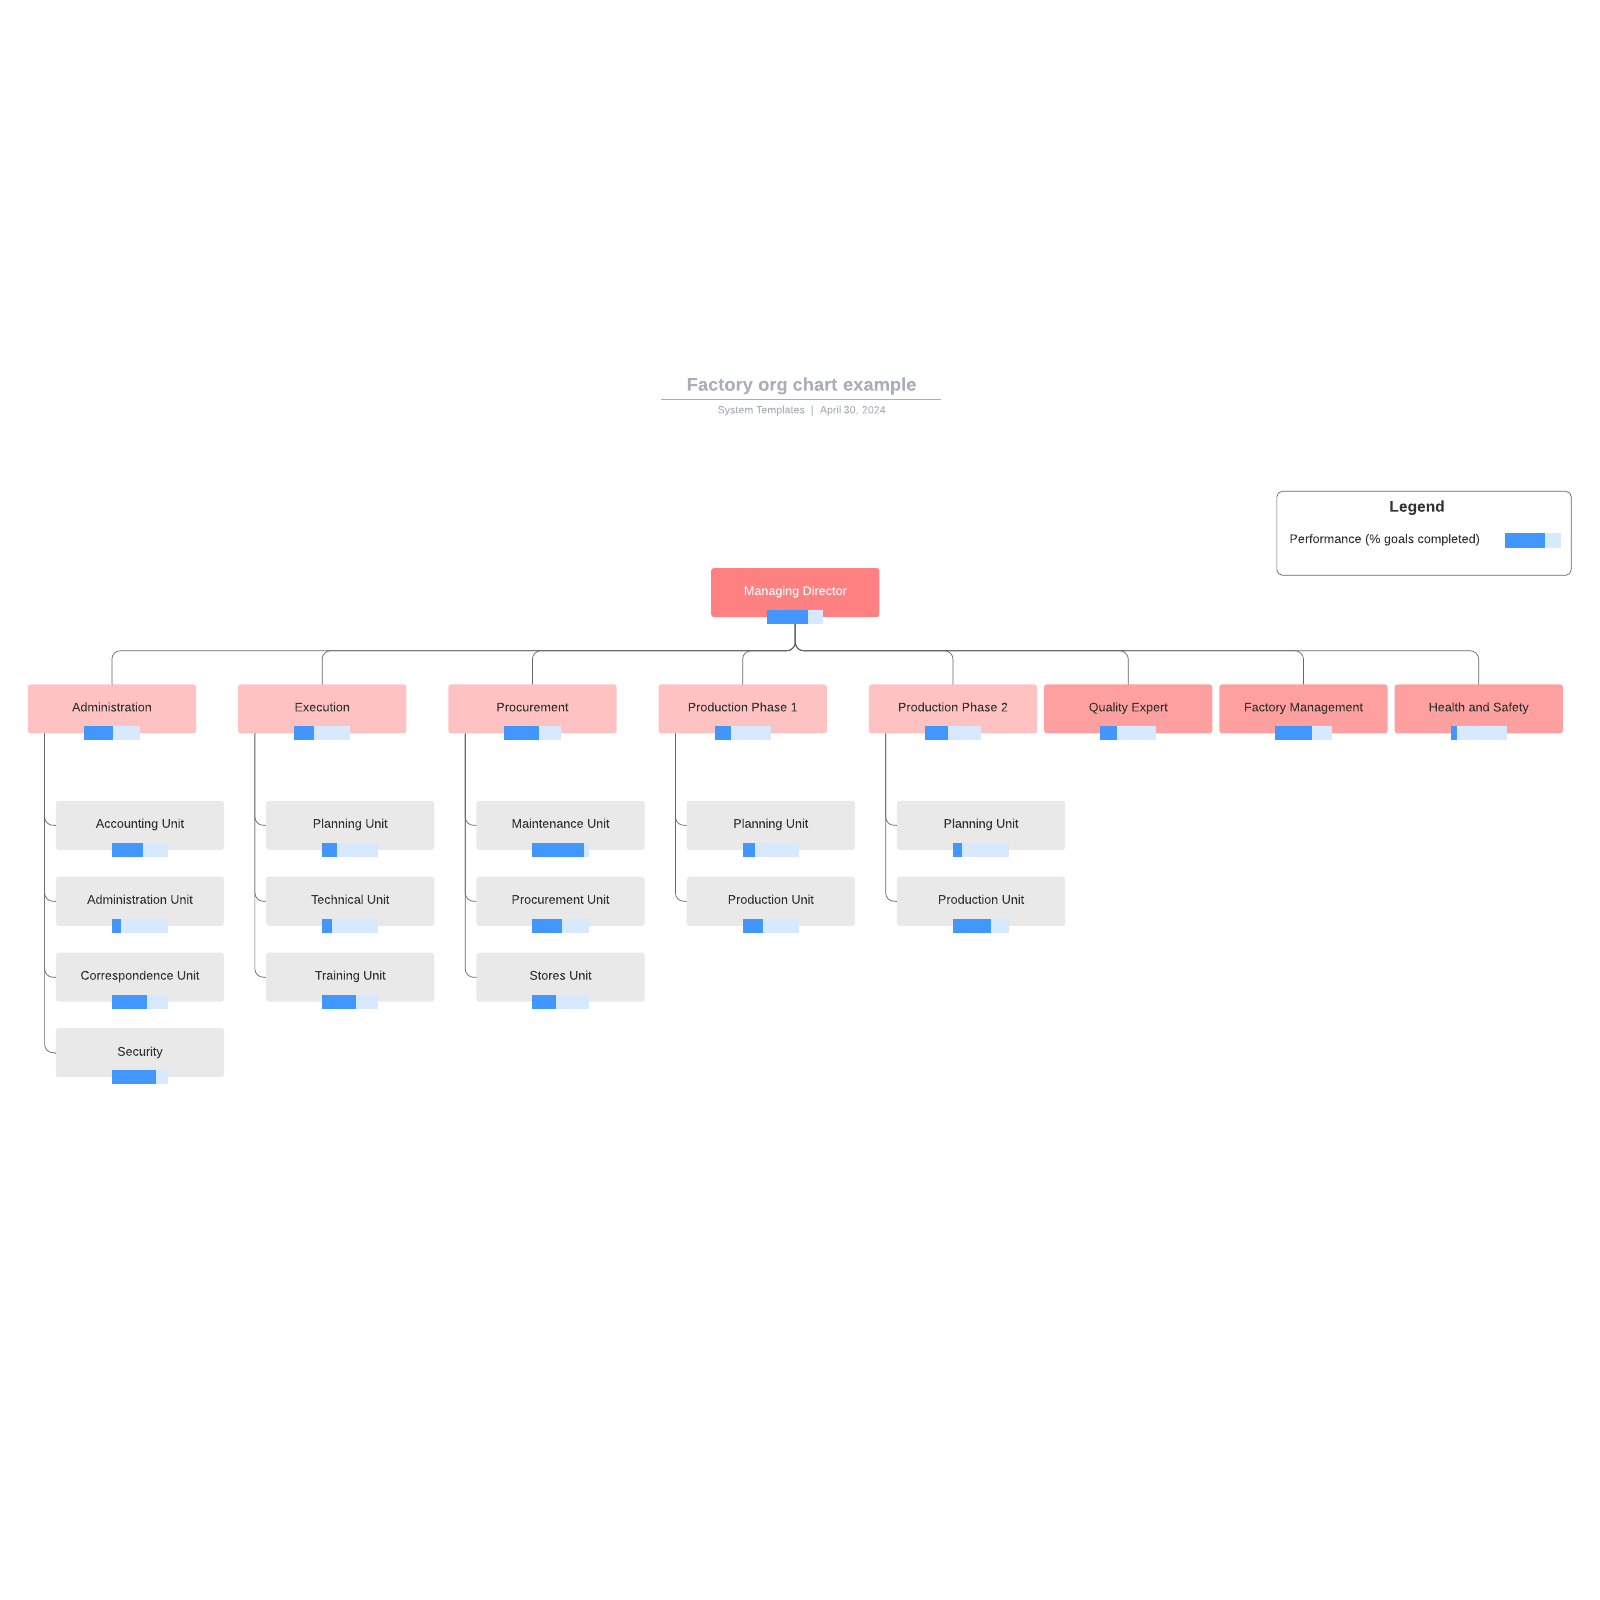 Factory org chart example example